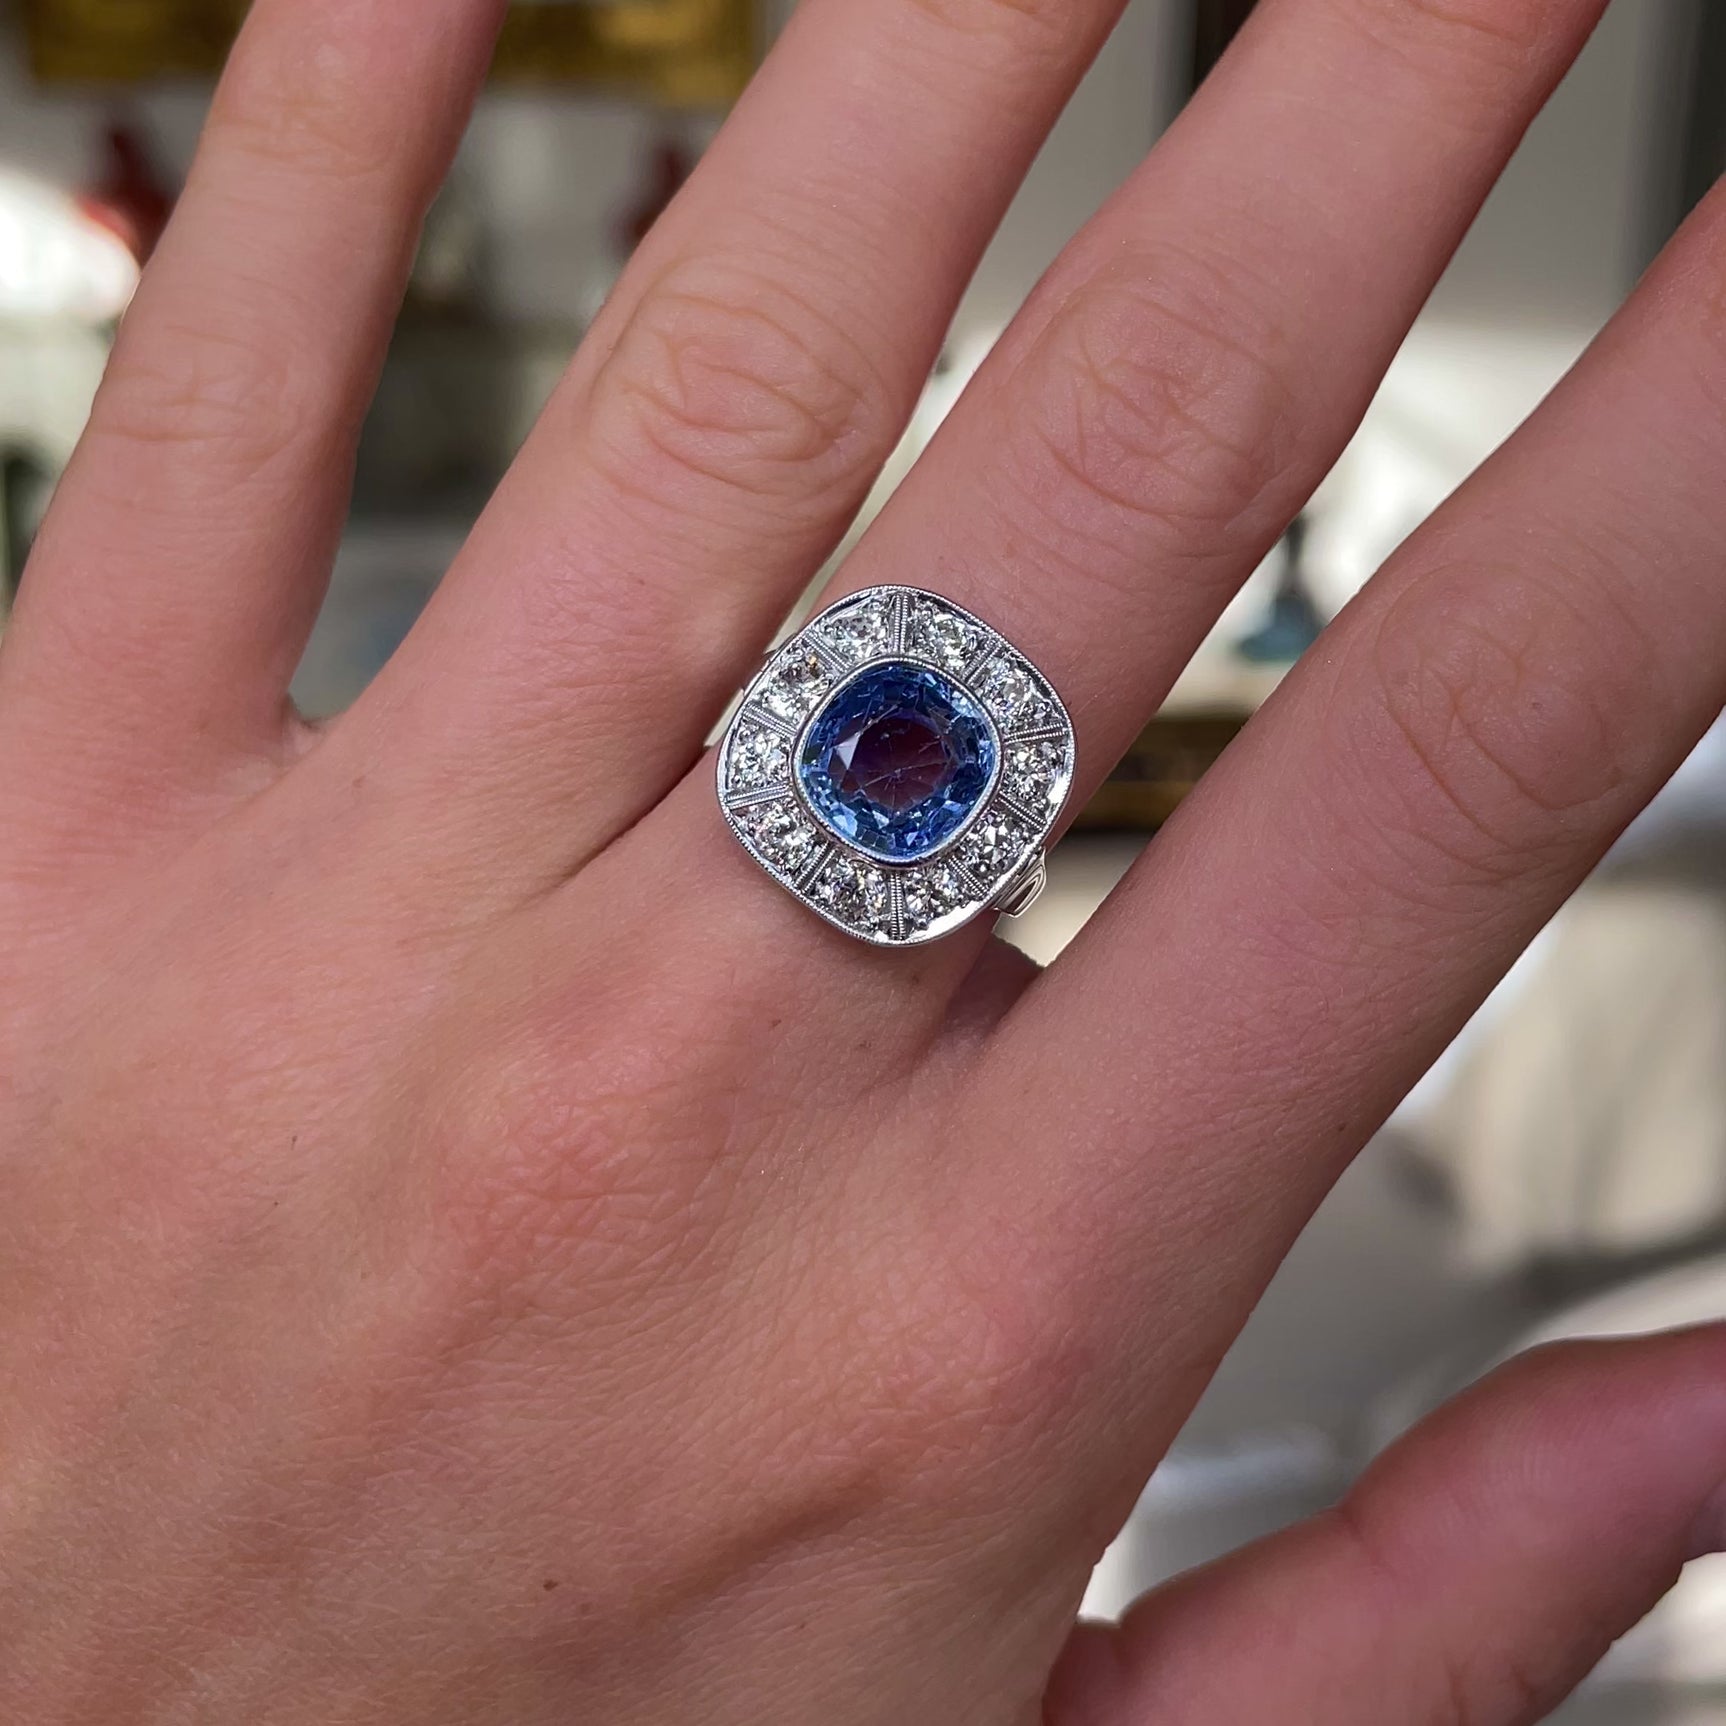 Art Deco, ceylon cushion-cut sapphire and diamond cluster ring, worn on hand and rotated to give perspective.